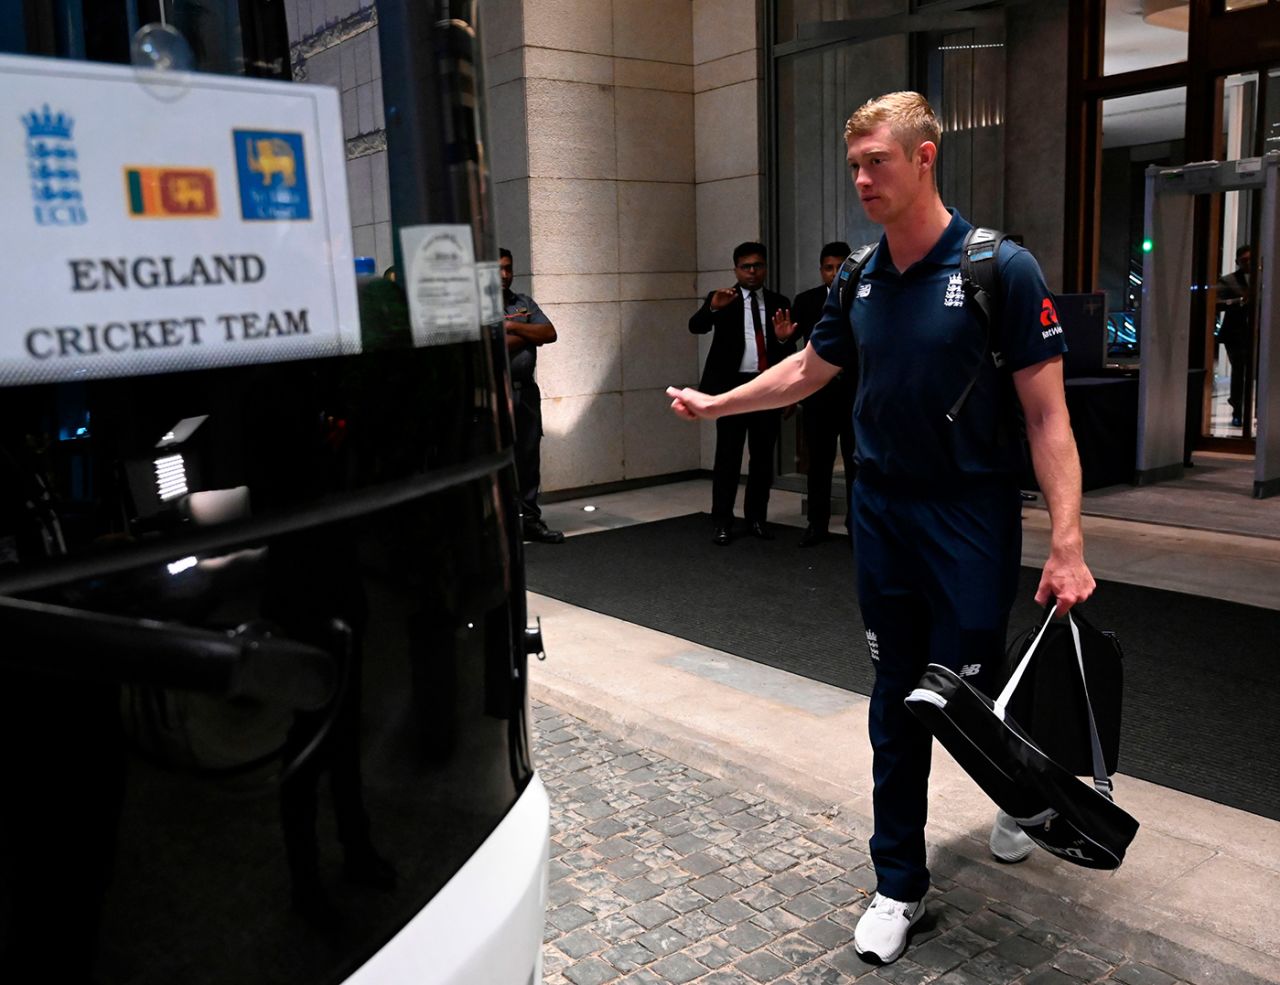 Keaton Jennings boards a bus for Colombo airport after the postponement of England's tour of Sri Lanka, March 14, 2020